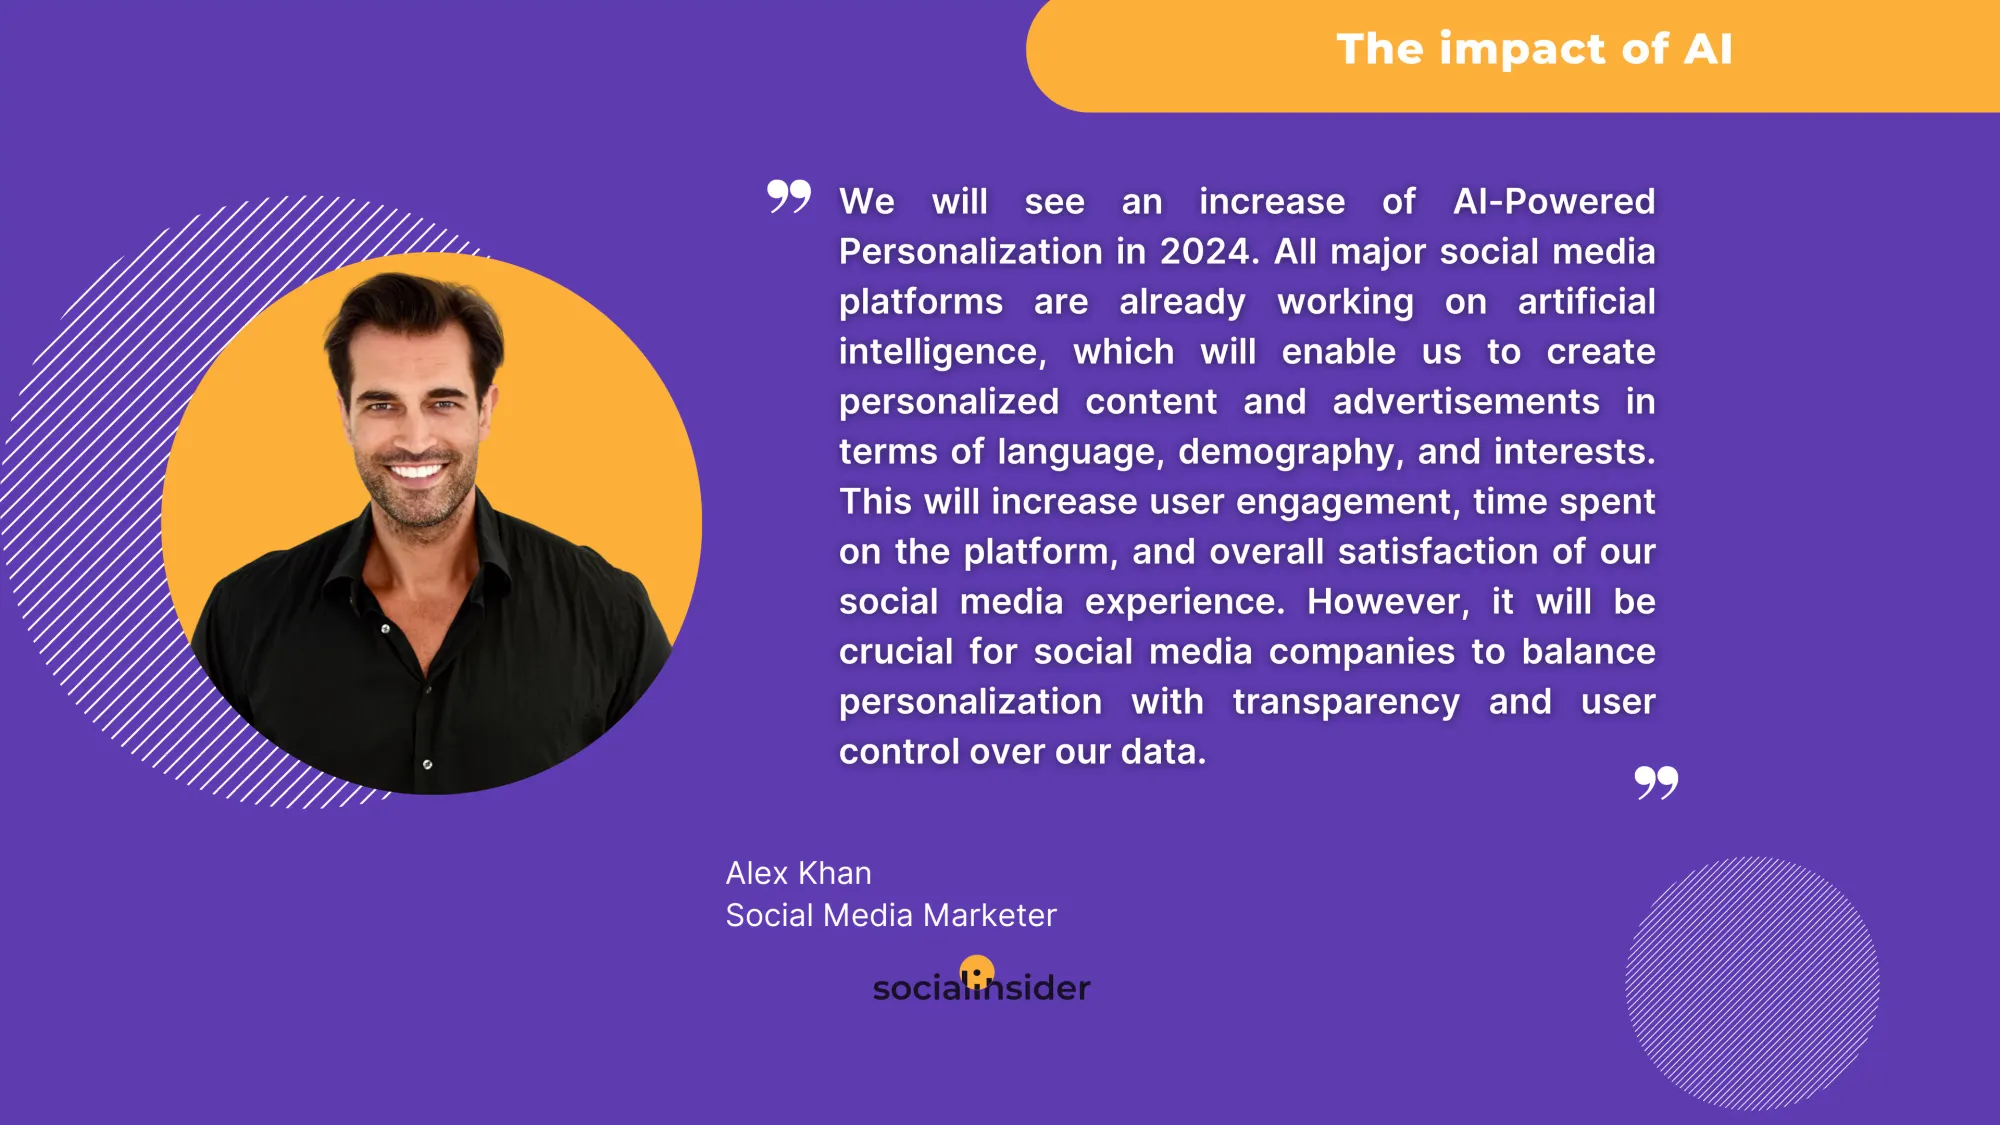 this is a quote from Alex Khan related to social media trends and AI 